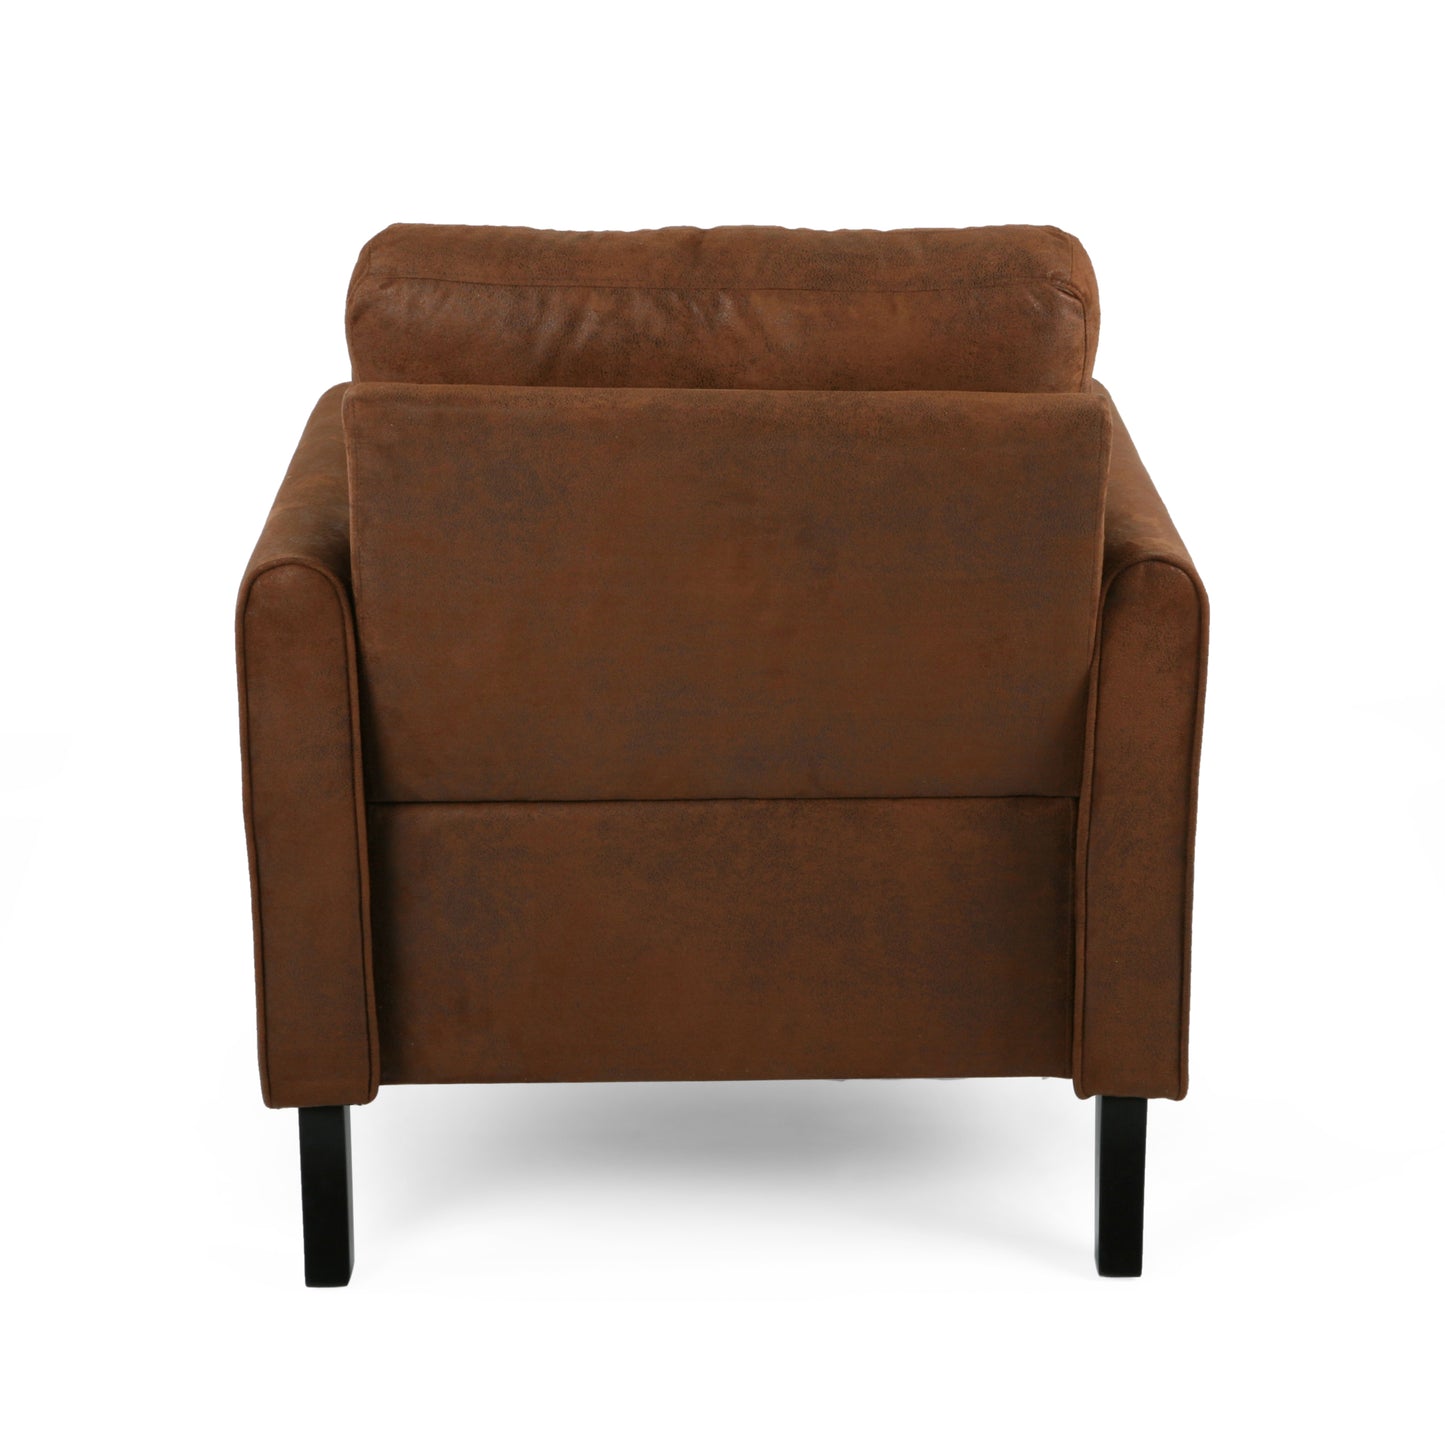 Xyan Contemporary Club Chair with Plush Microfiber Cushions